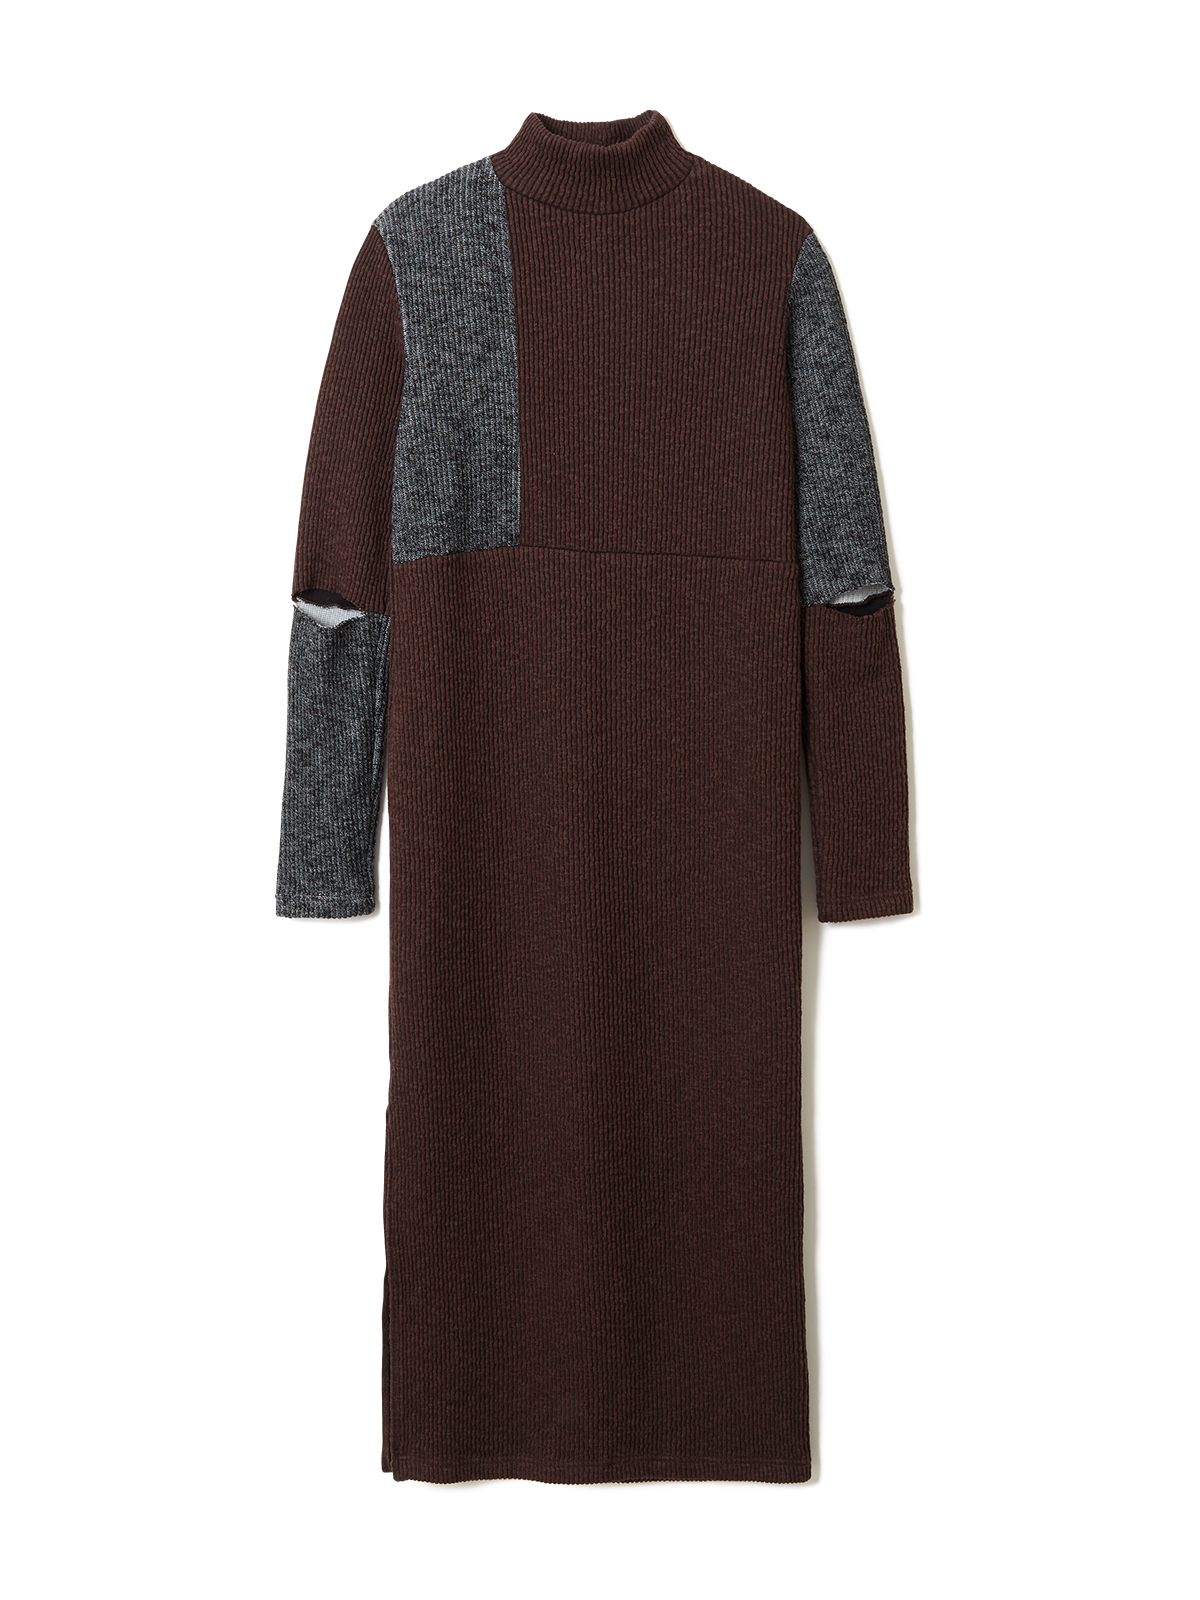 panel knit onepiece / brown